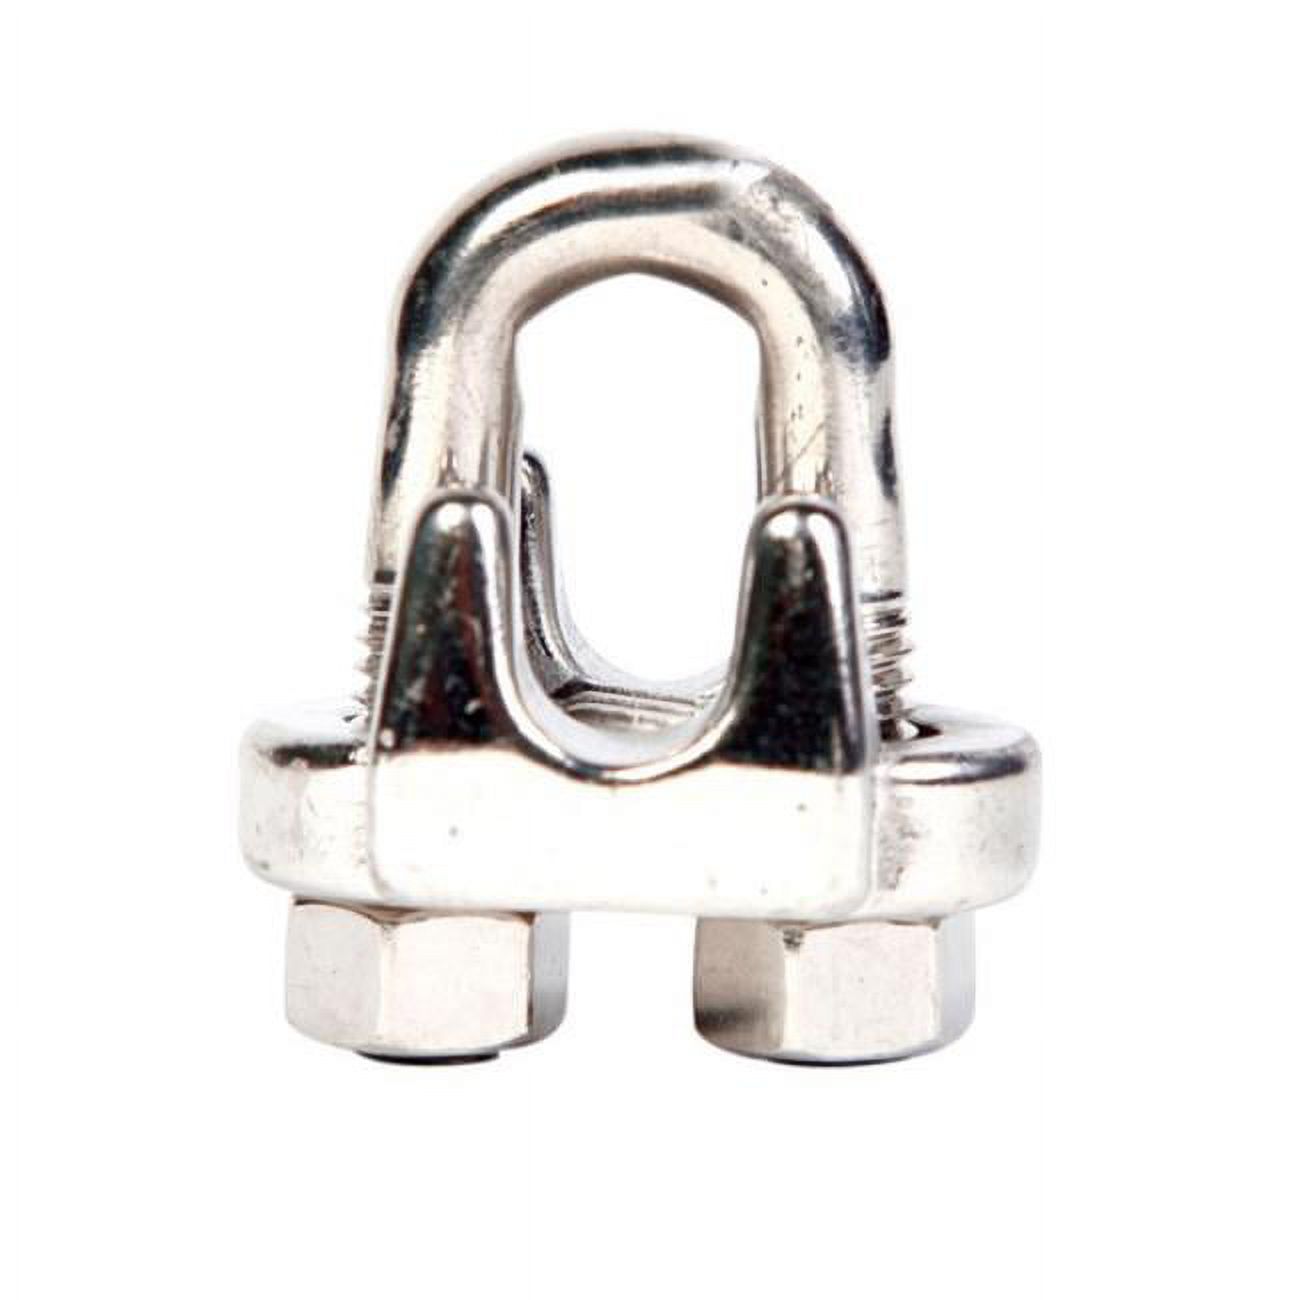 Campbell Polished Stainless Steel Wire Rope Clip - image 1 of 2